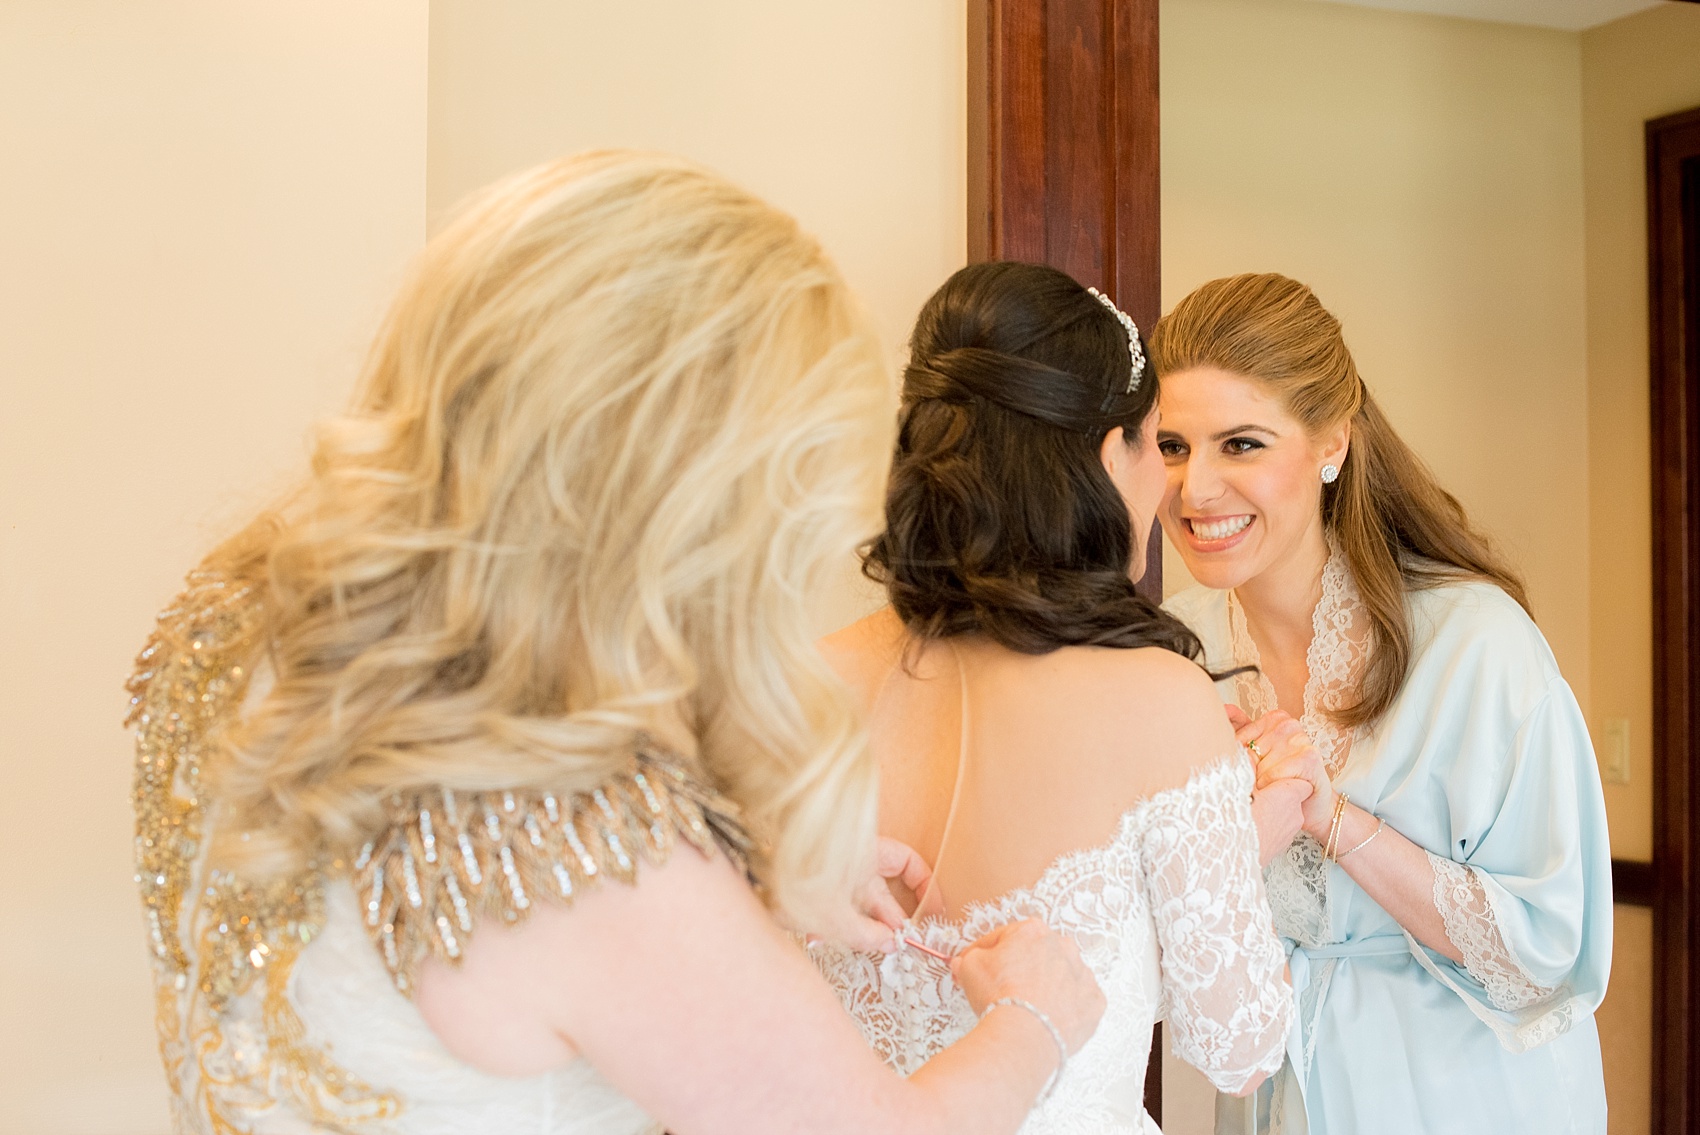 Mikkel Paige Photography photo of the bride's mother helping her into her Inbal Dror gown on her wedding day at Temple Emanu-El in Closter, NJ.